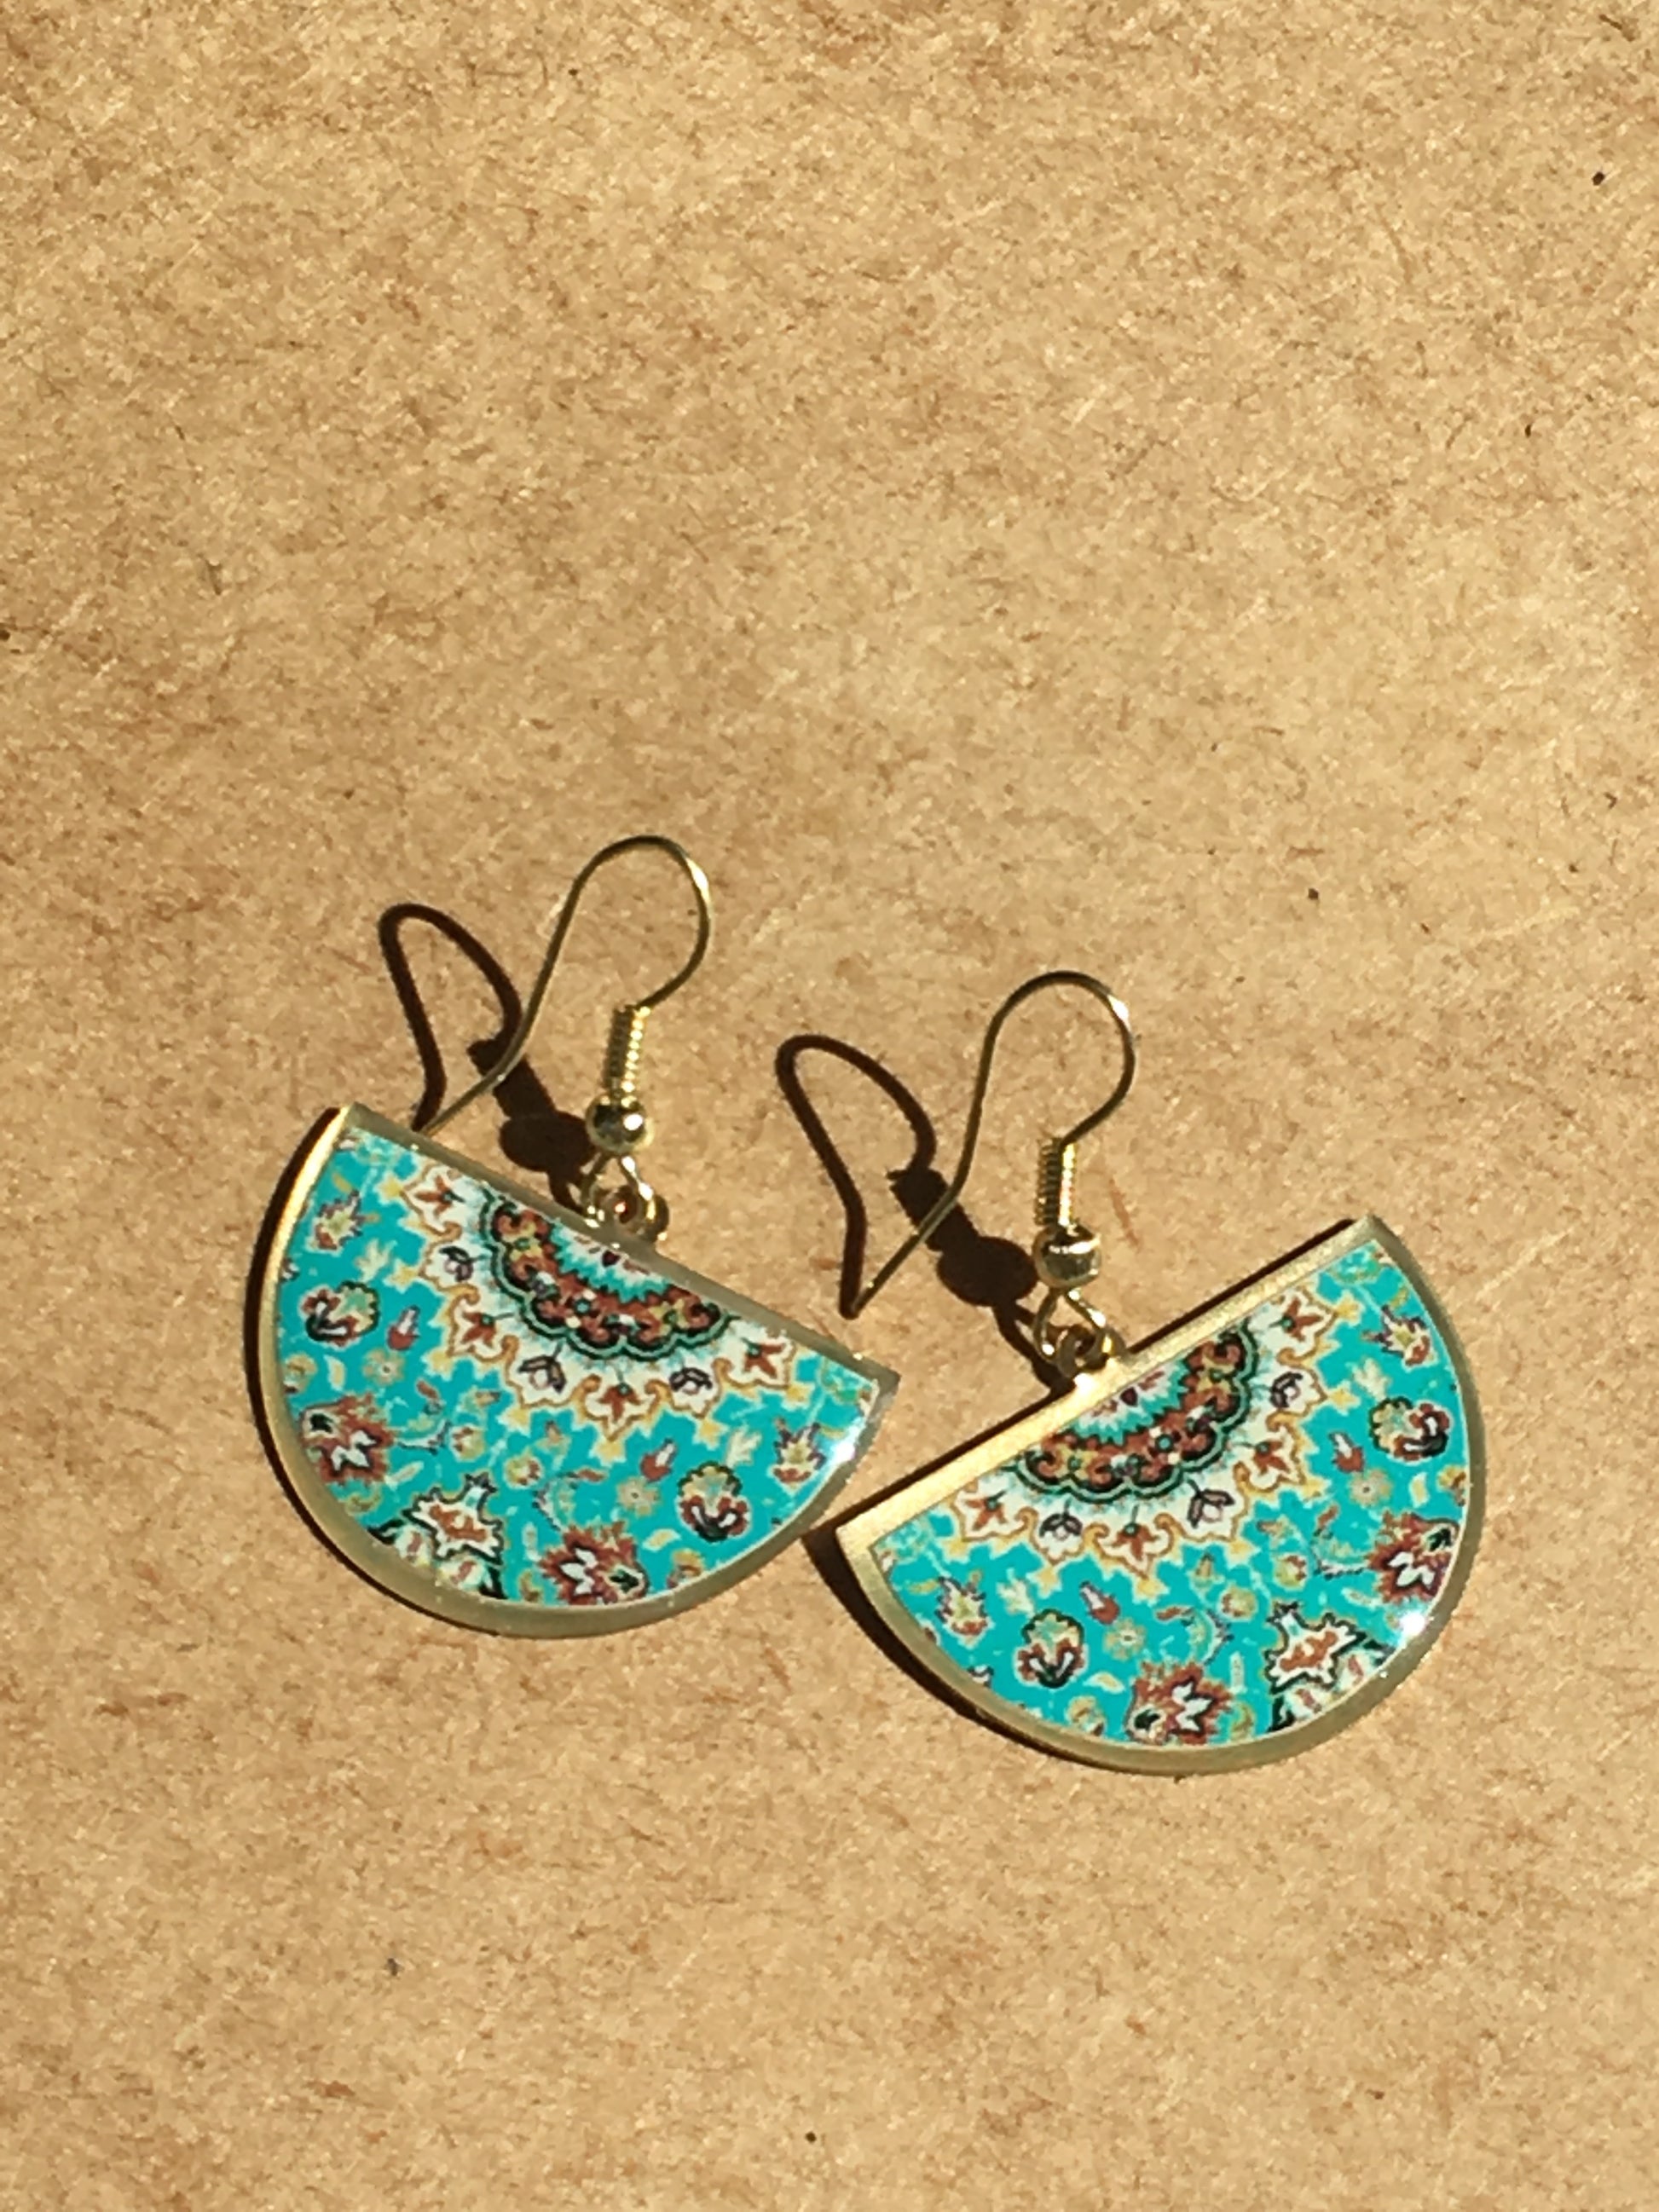 turkish persian pattern turquoise and green half circle earrings dangle chic trendy brass earrings